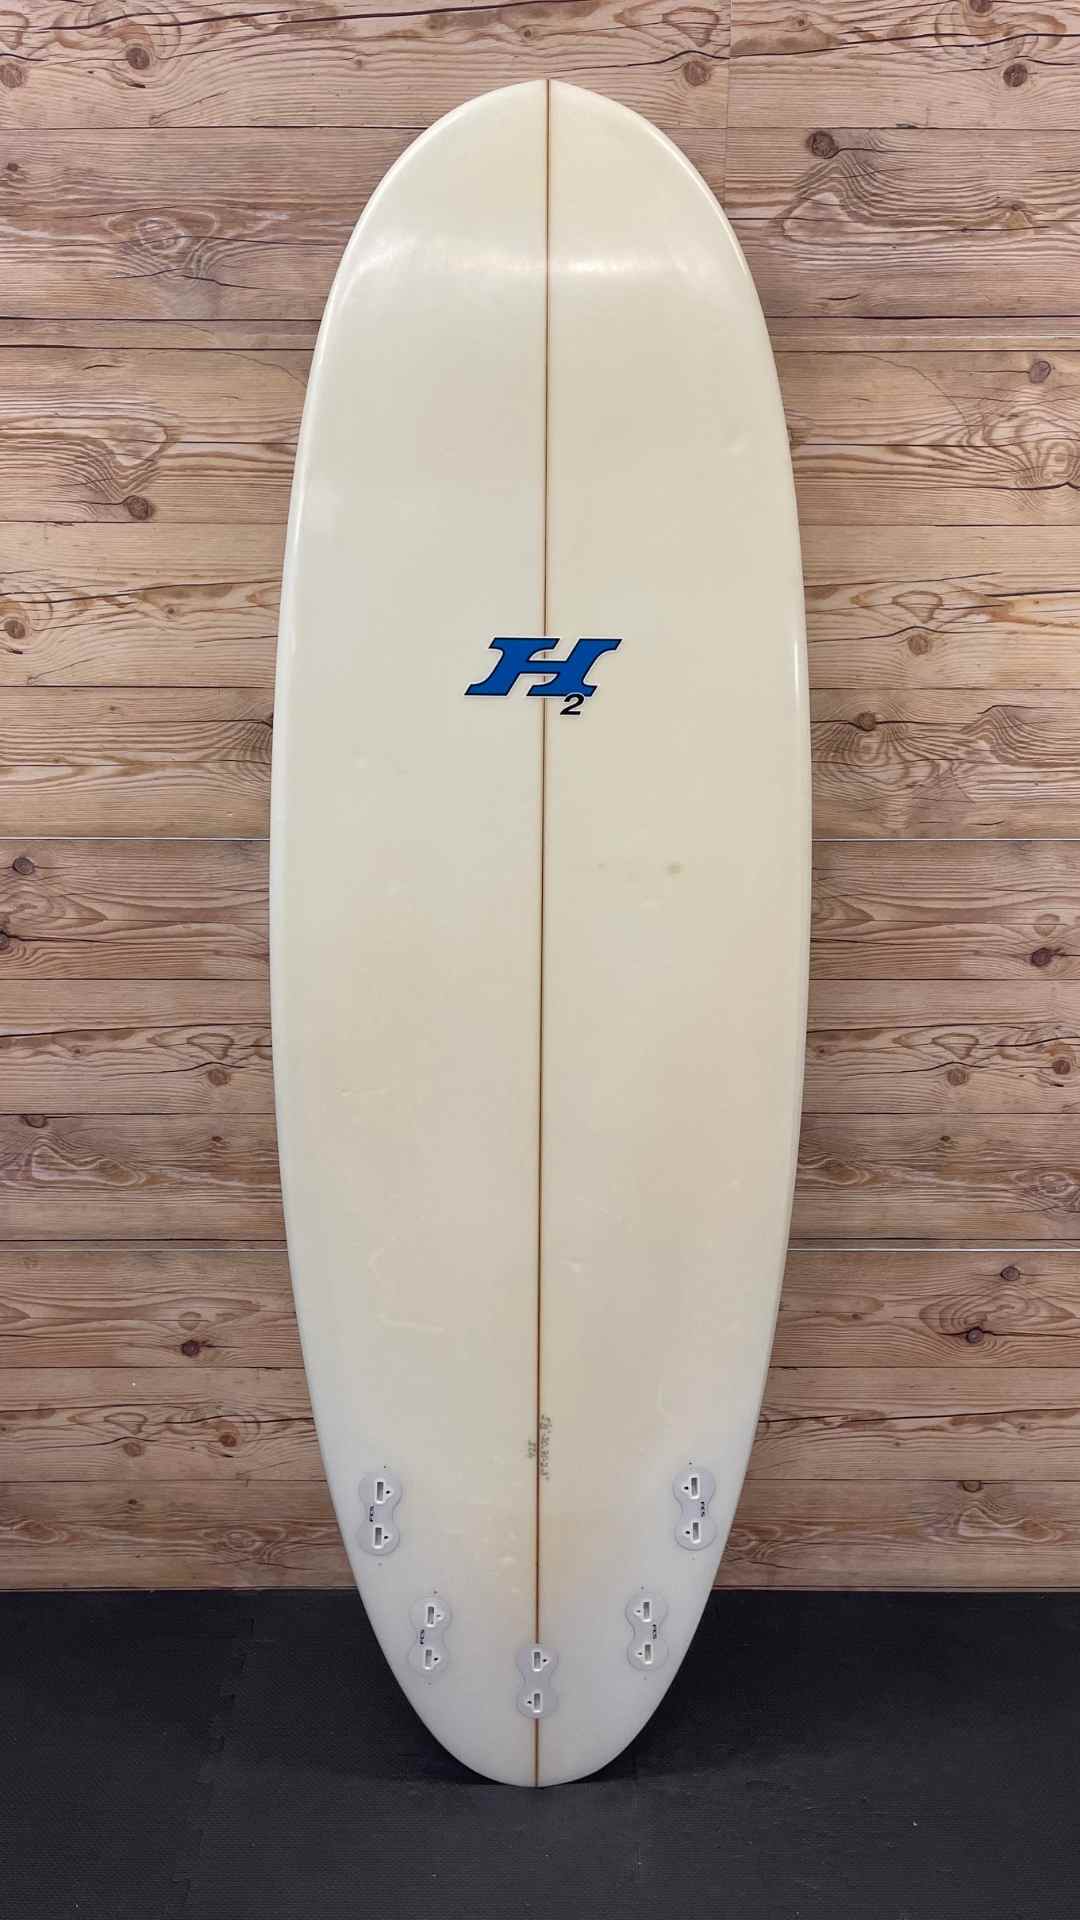 H2 Funboard 5'8"